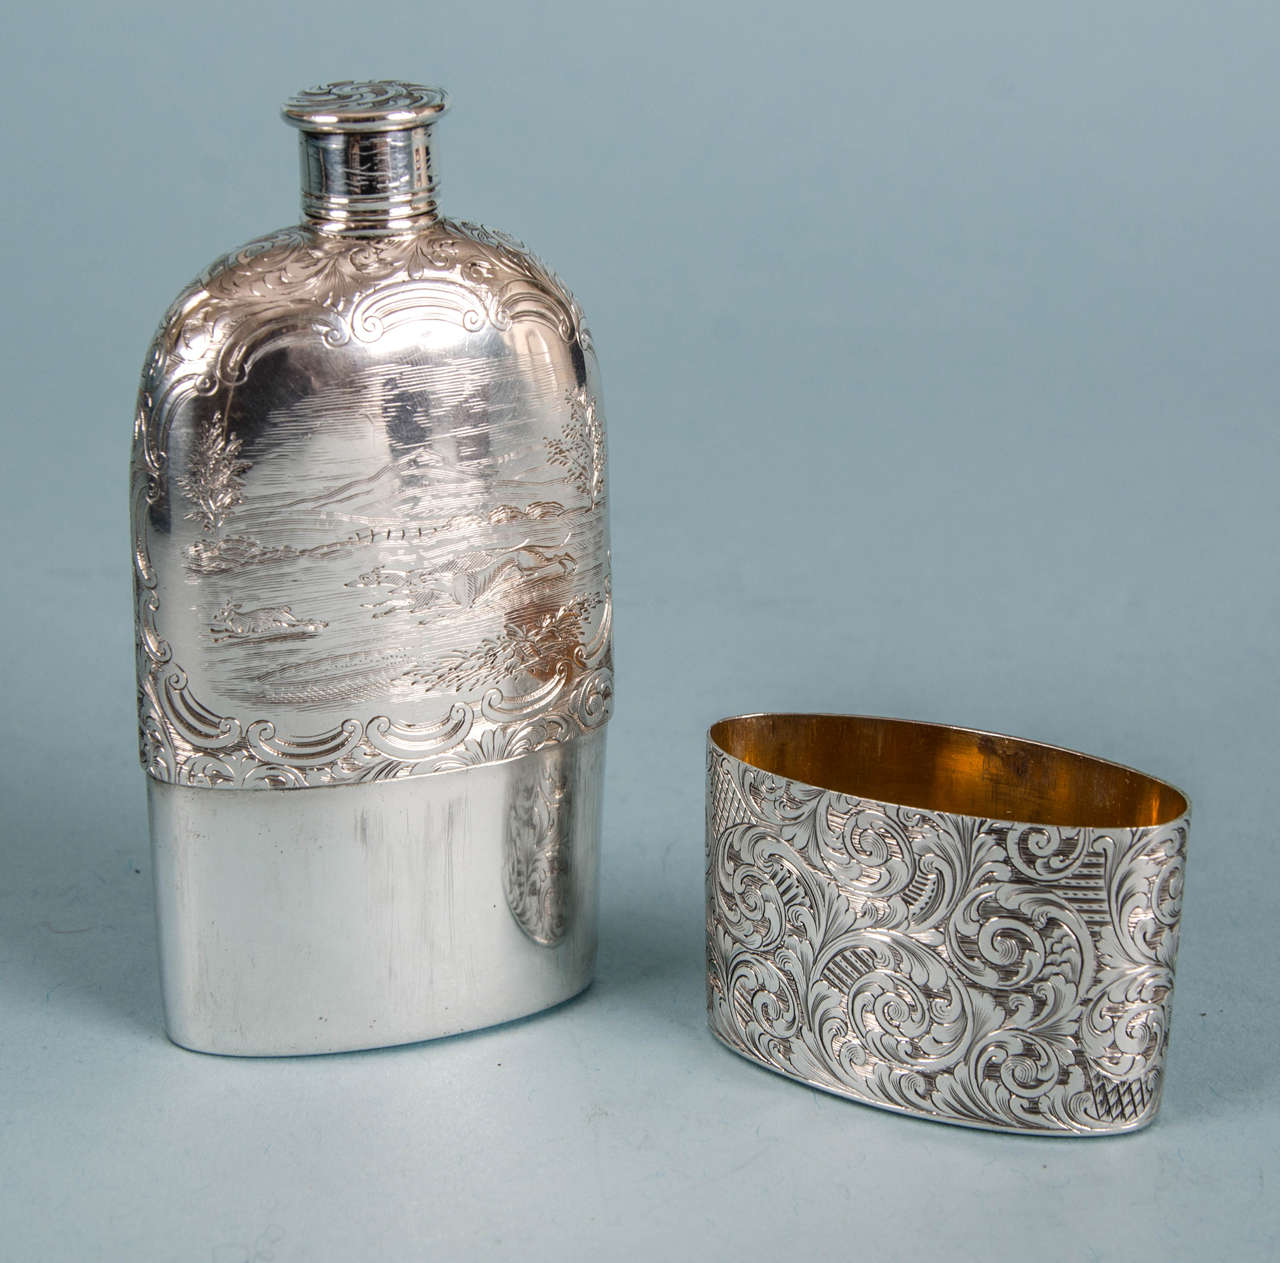 Mid-19th Century Victorian Engraved Sterling Silver Flask by Yapp & Woodward, Birmingham, 1854